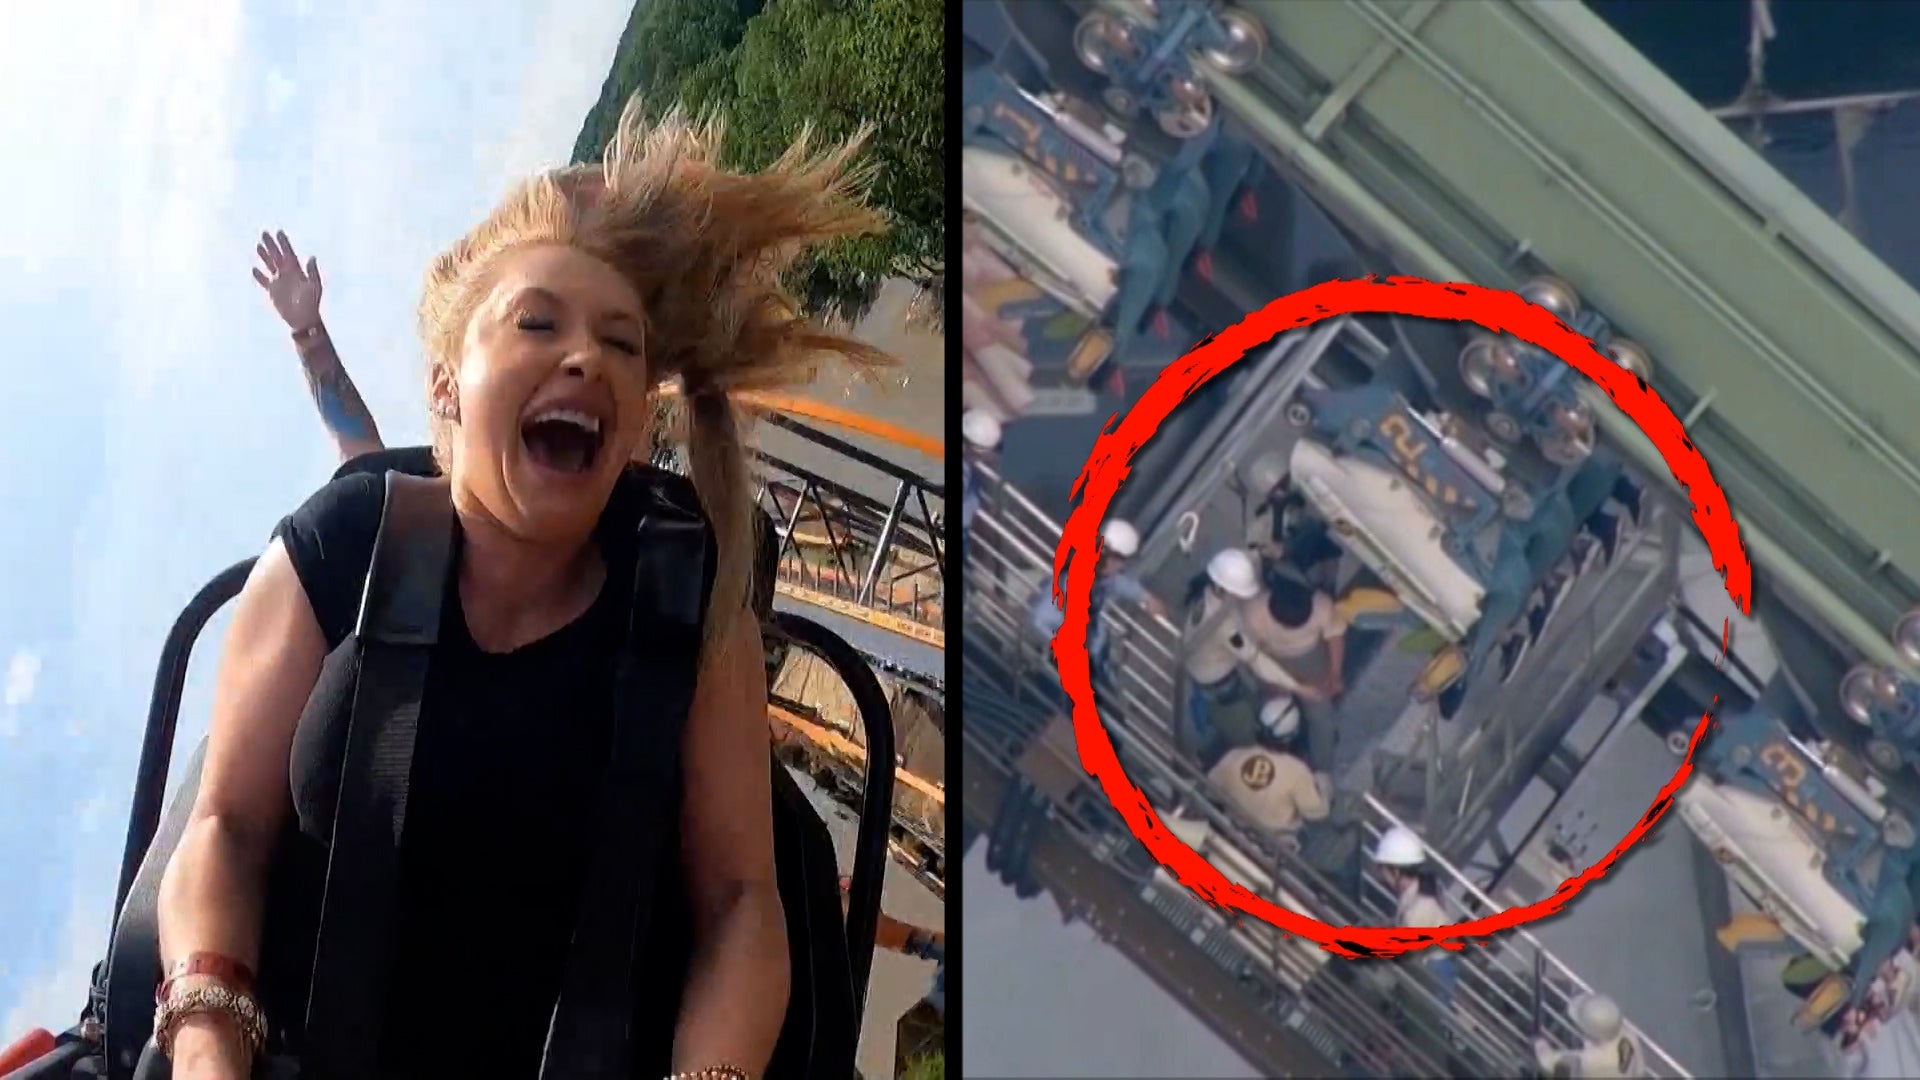 brittanie campbell add photo nude at amusement park